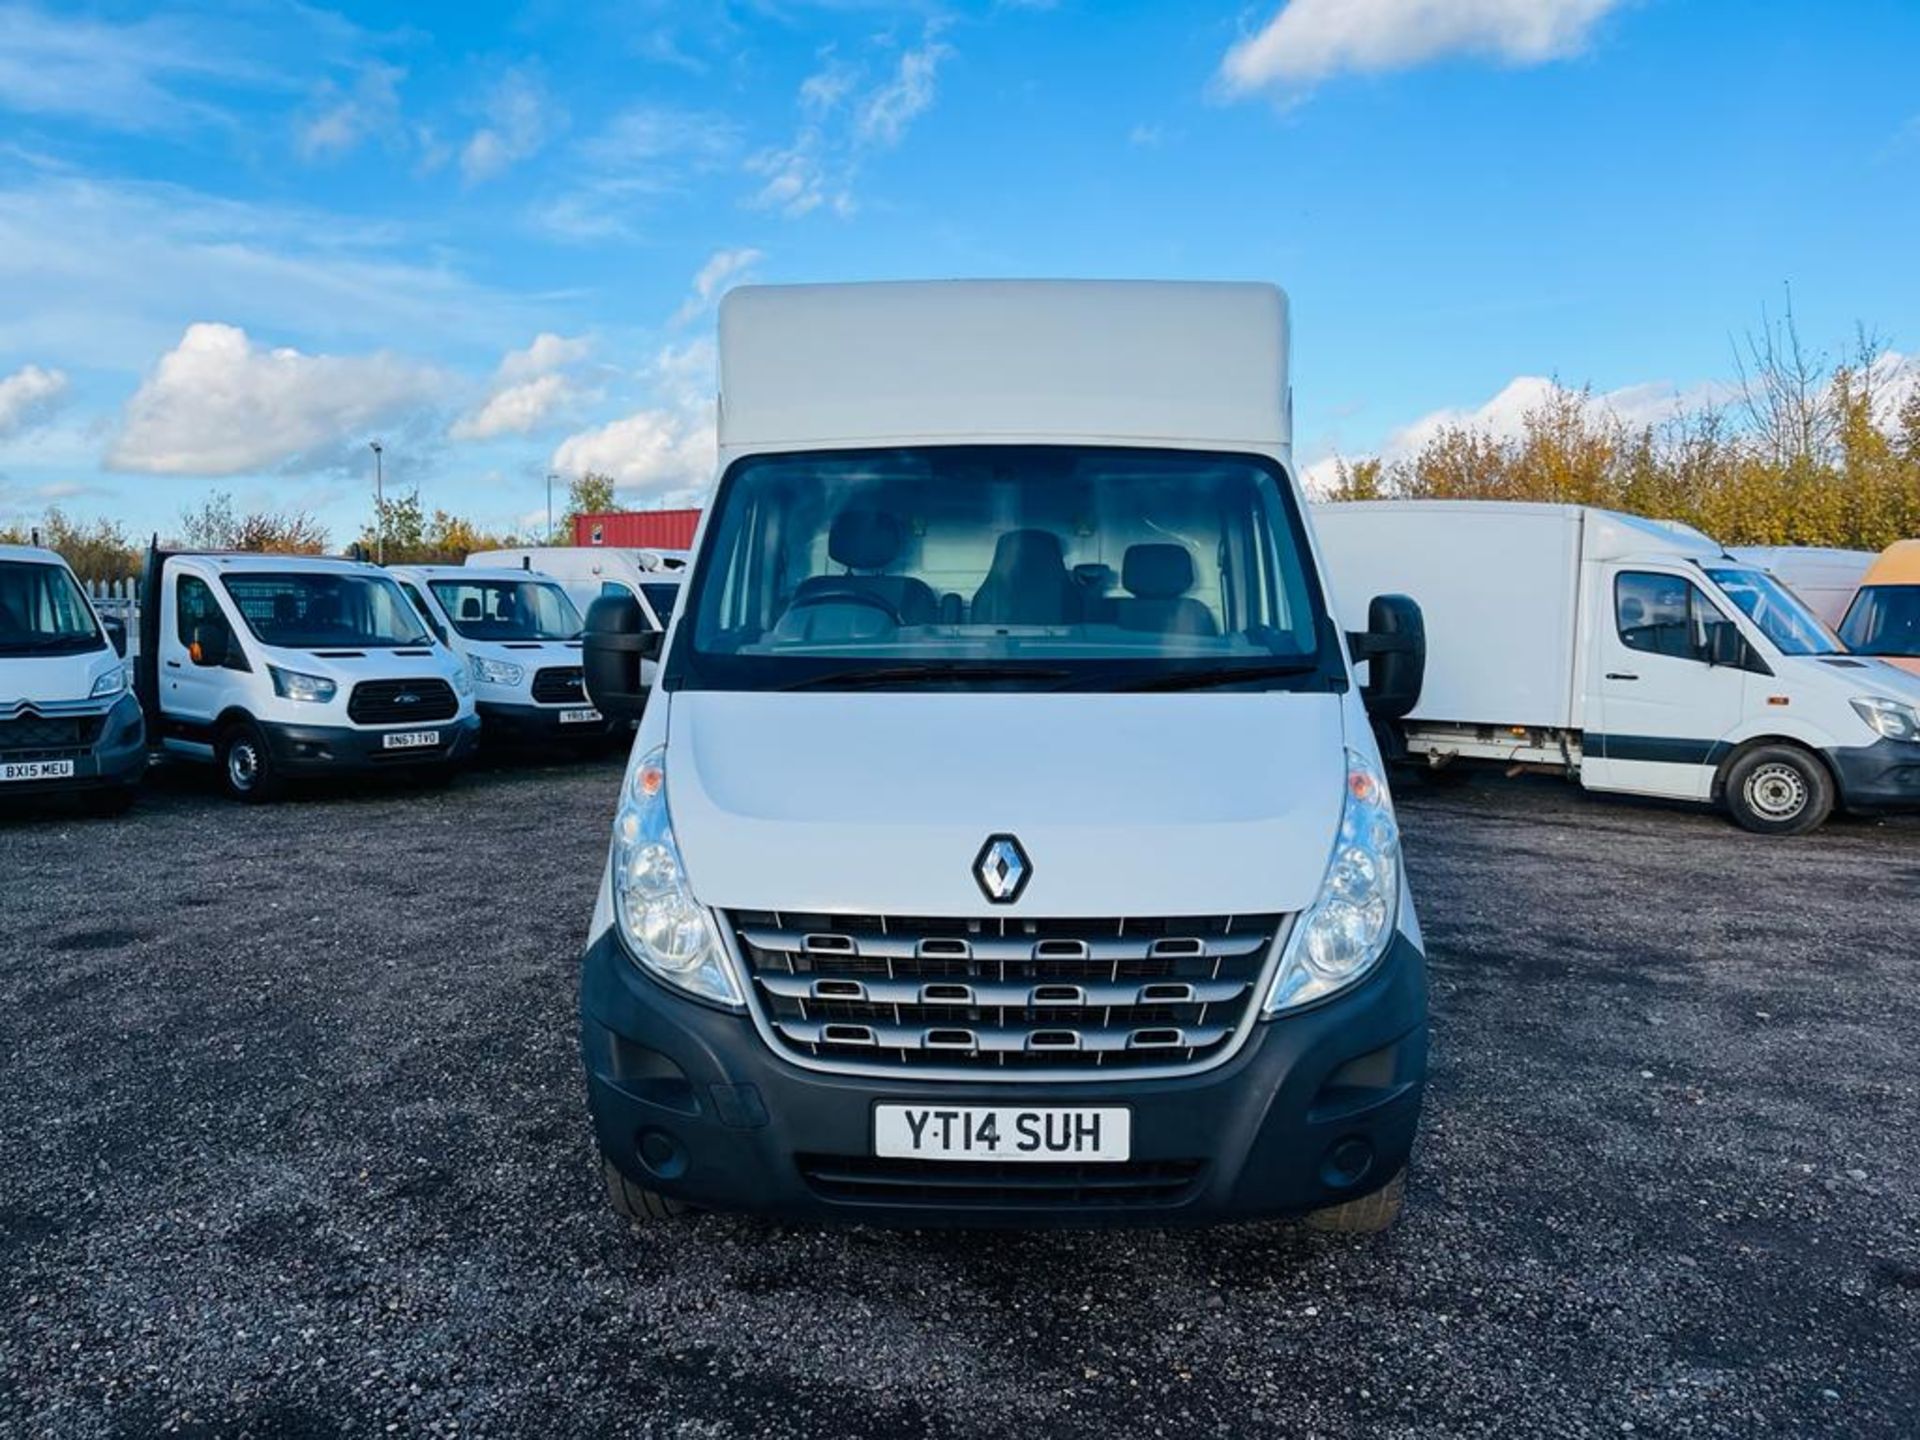 ** ON SALE ** RENAULT MASTER 3.5T RWD 2.3 LL35DCI 125 Luton 2014 "14 Reg" - A/C - Bluetooth - Image 2 of 22